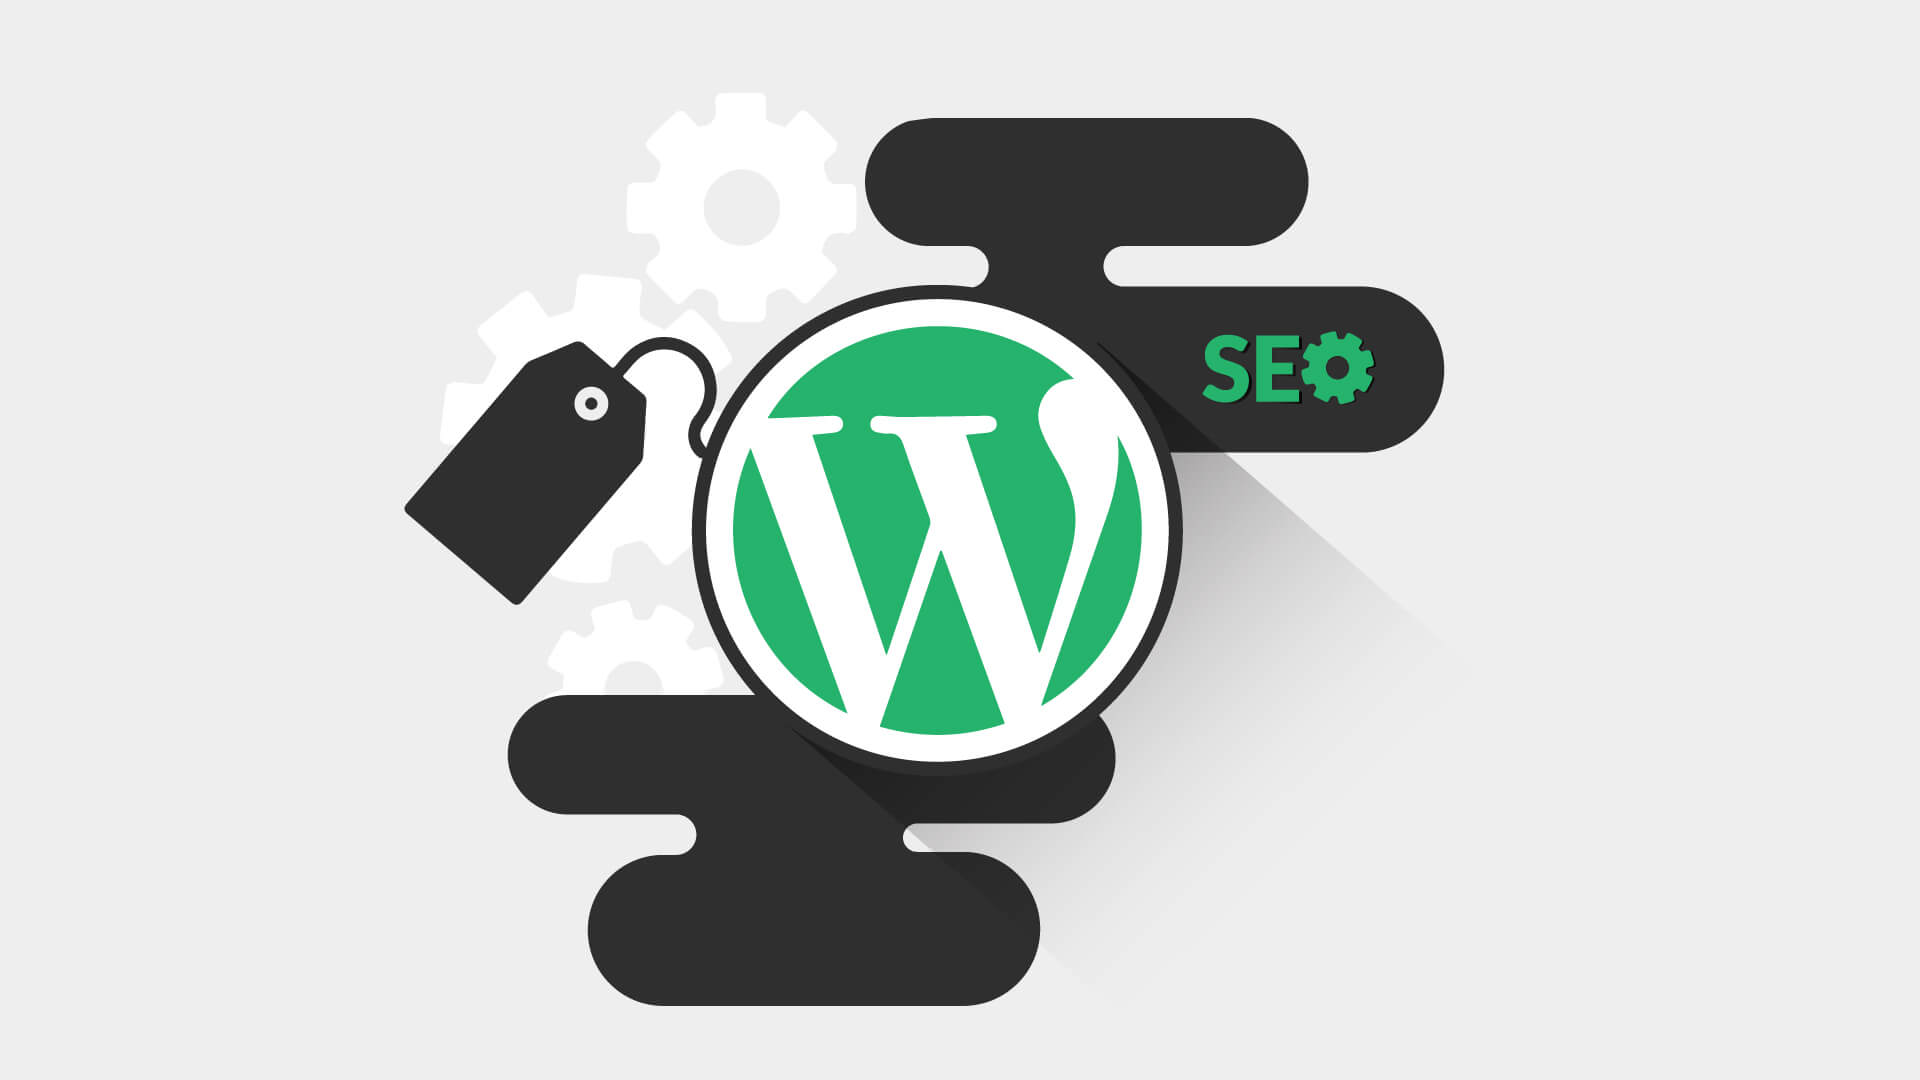 Wordpress tags SEO, learn all about them